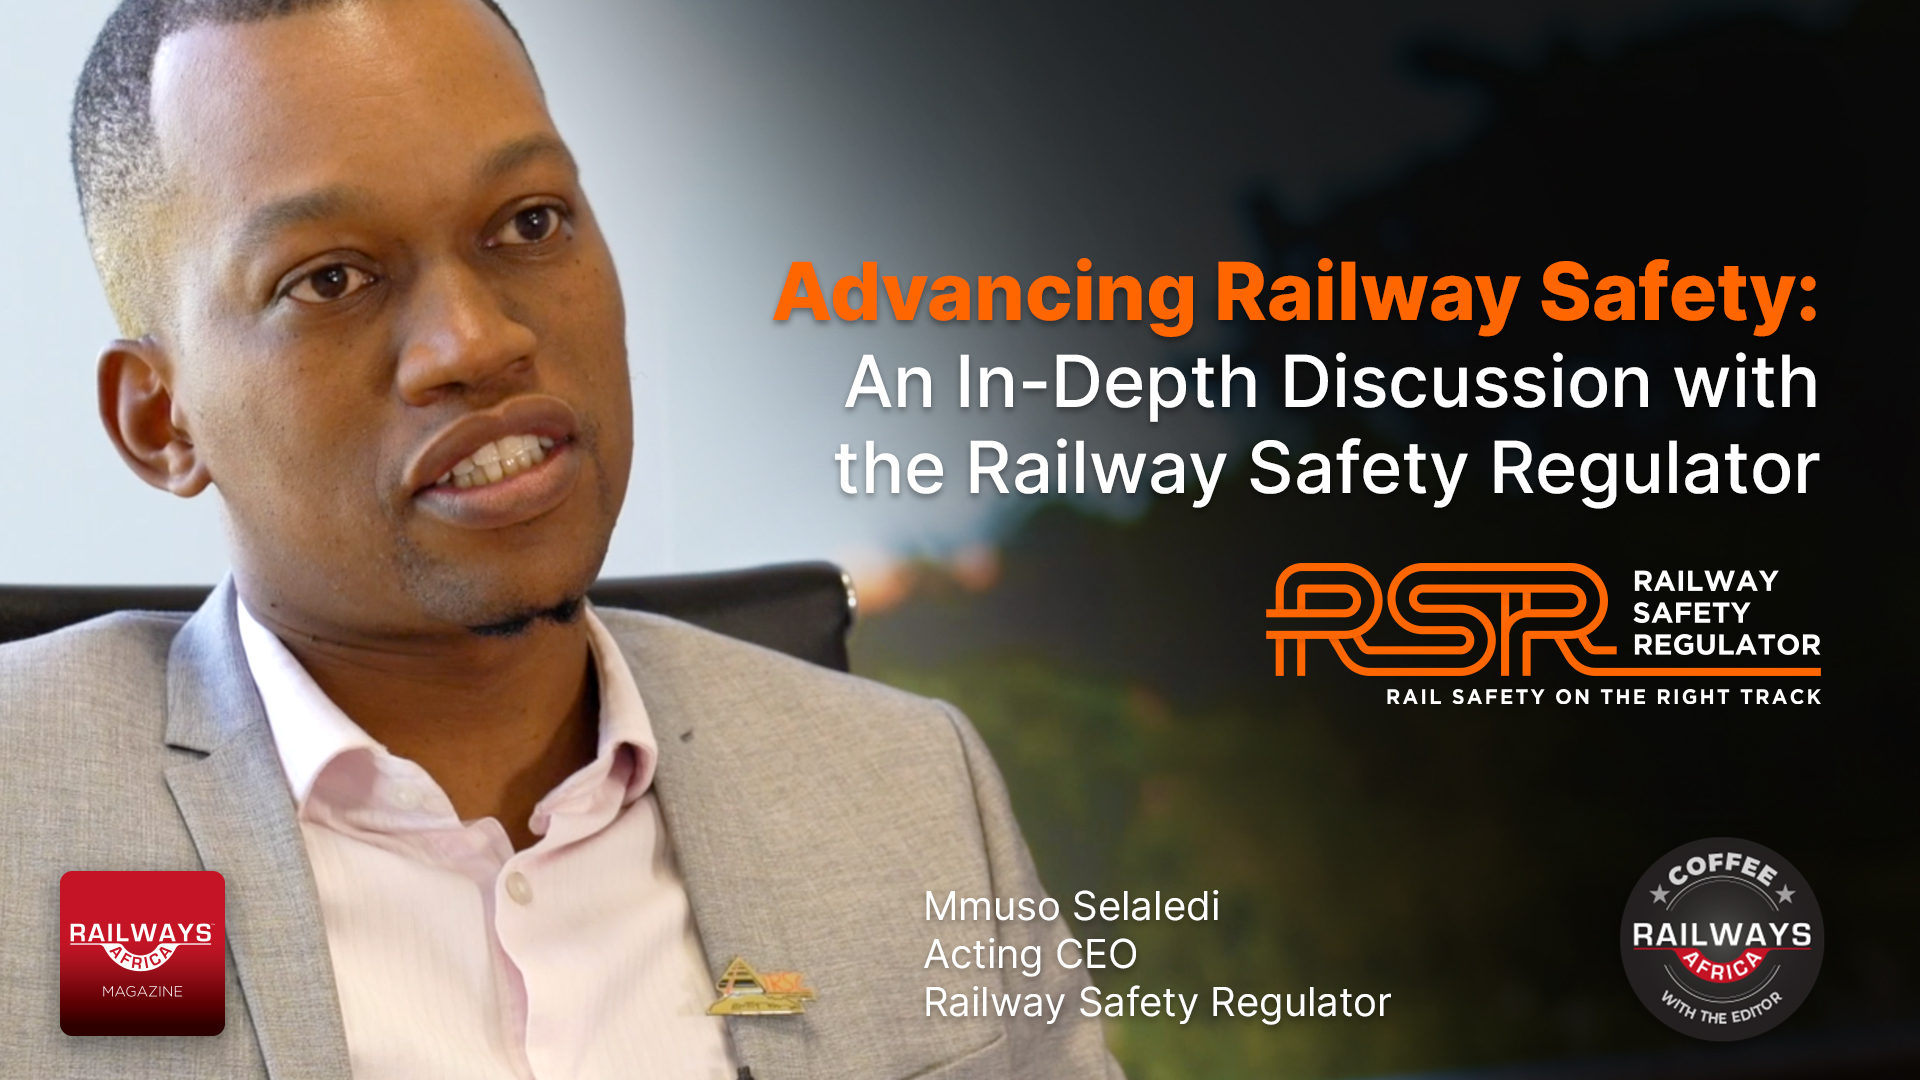 Advancing Railway Safety: An In-Depth Discussion with the Railway Safety Regulator